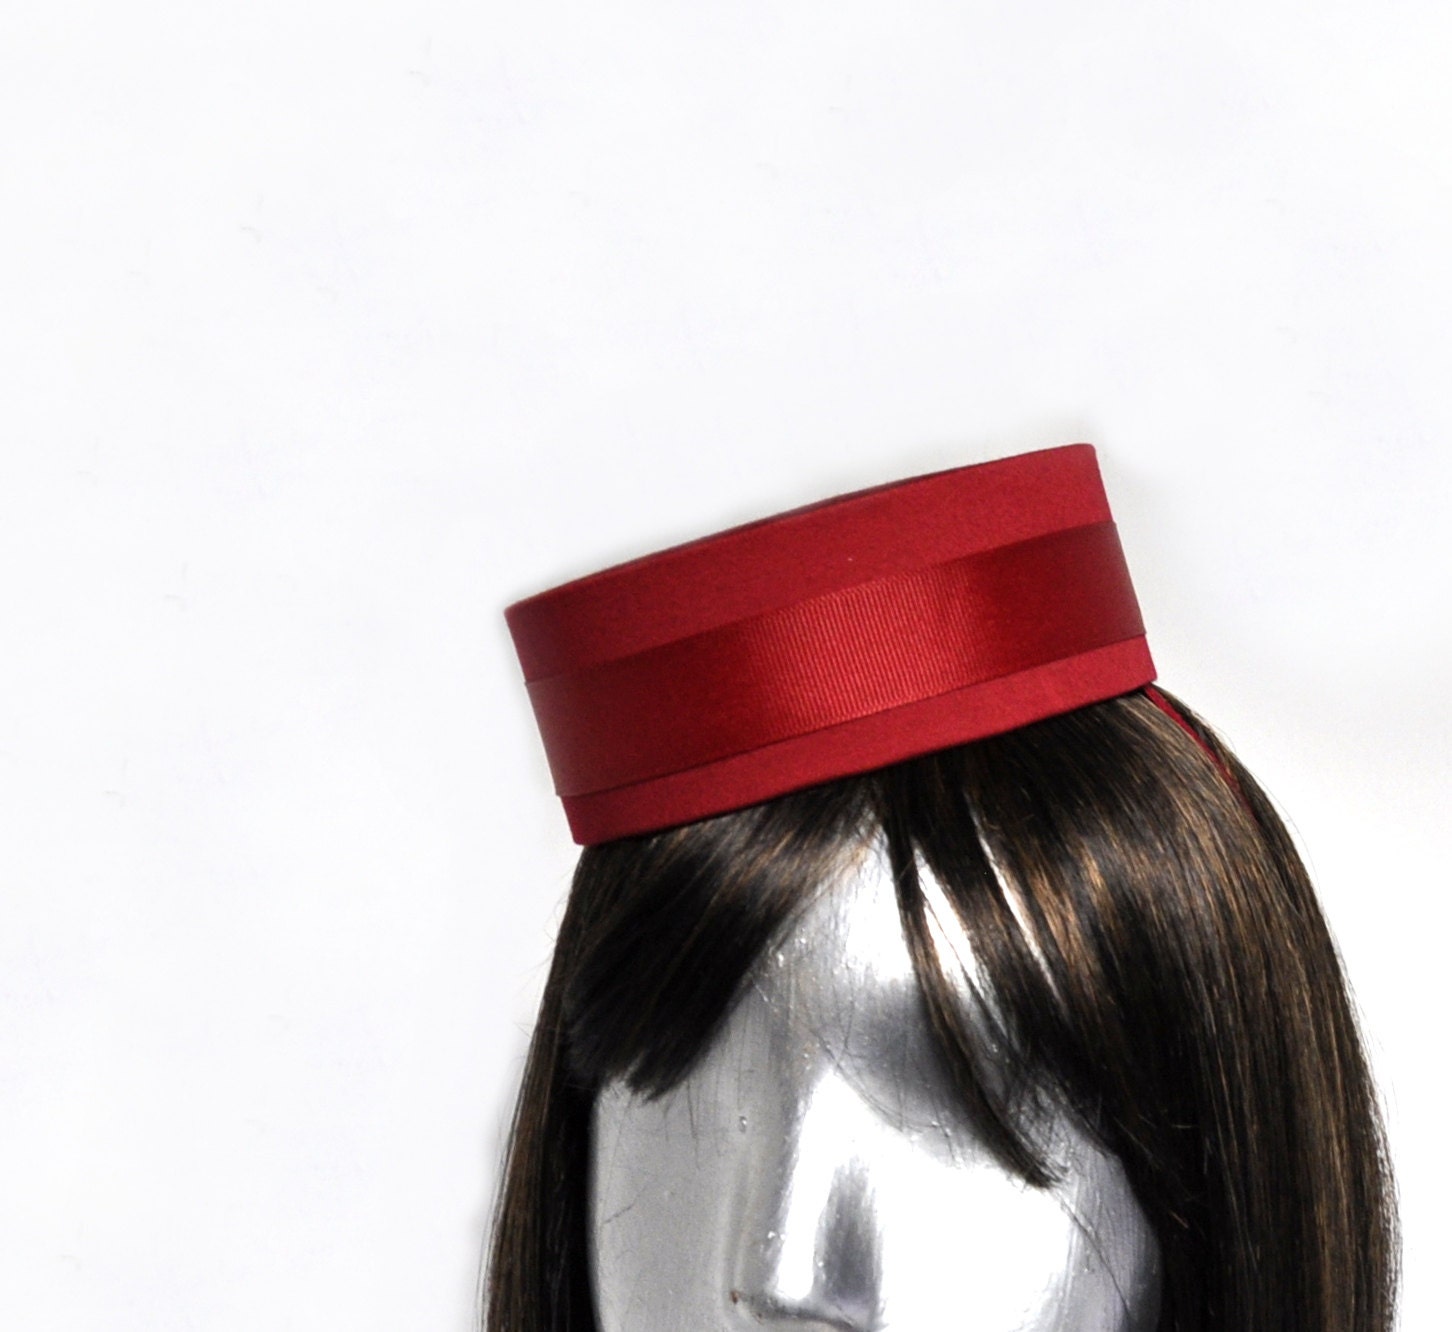 Pillbox Hat in Red Classic Cigarette Girl or Usher or